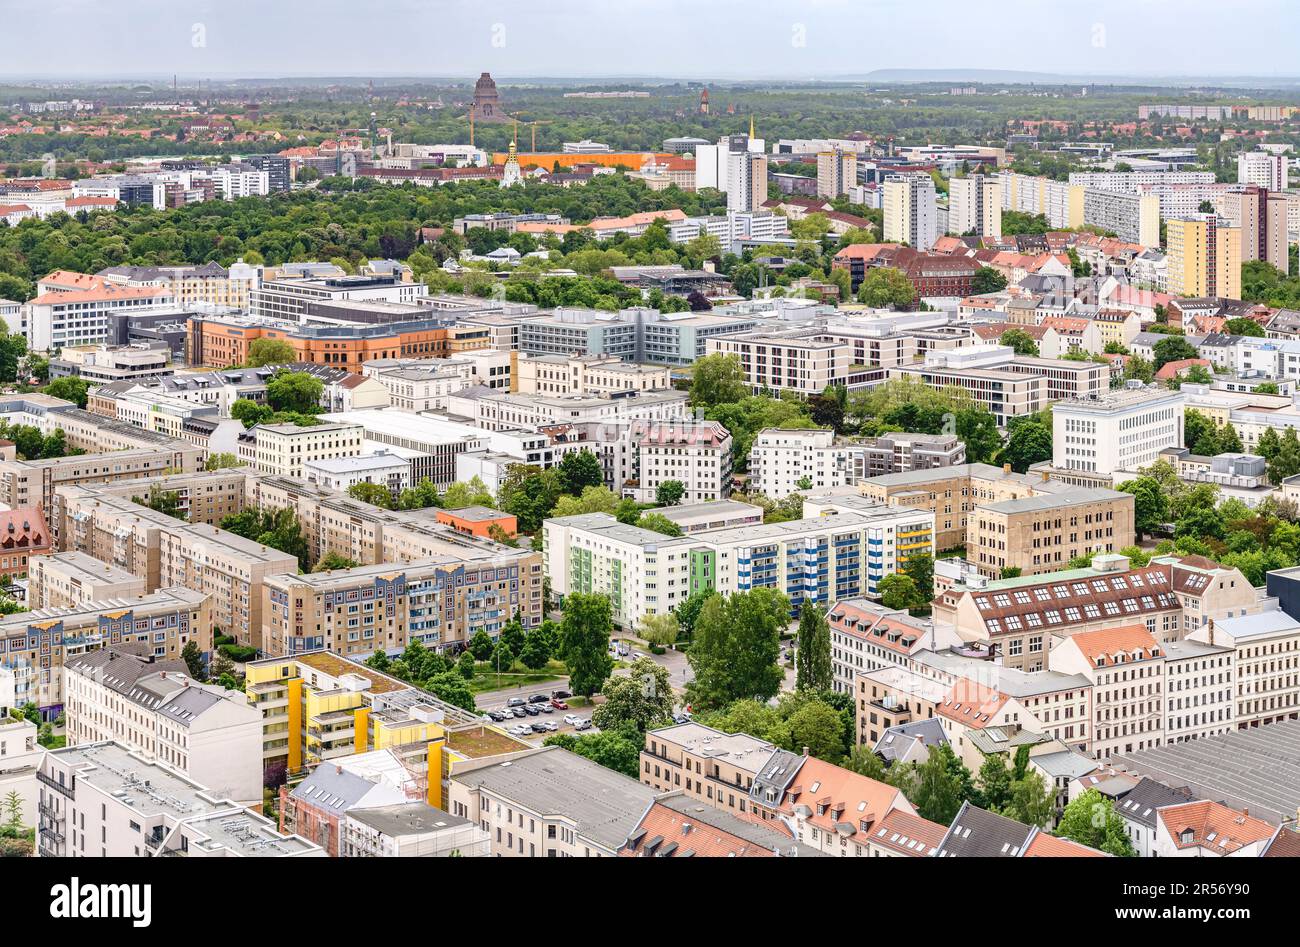 Aerial views from Leipzig's Panorama Tower. The city was badly bombed at the end of WWII so most of what you can see has been rebuilt since then. Stock Photo